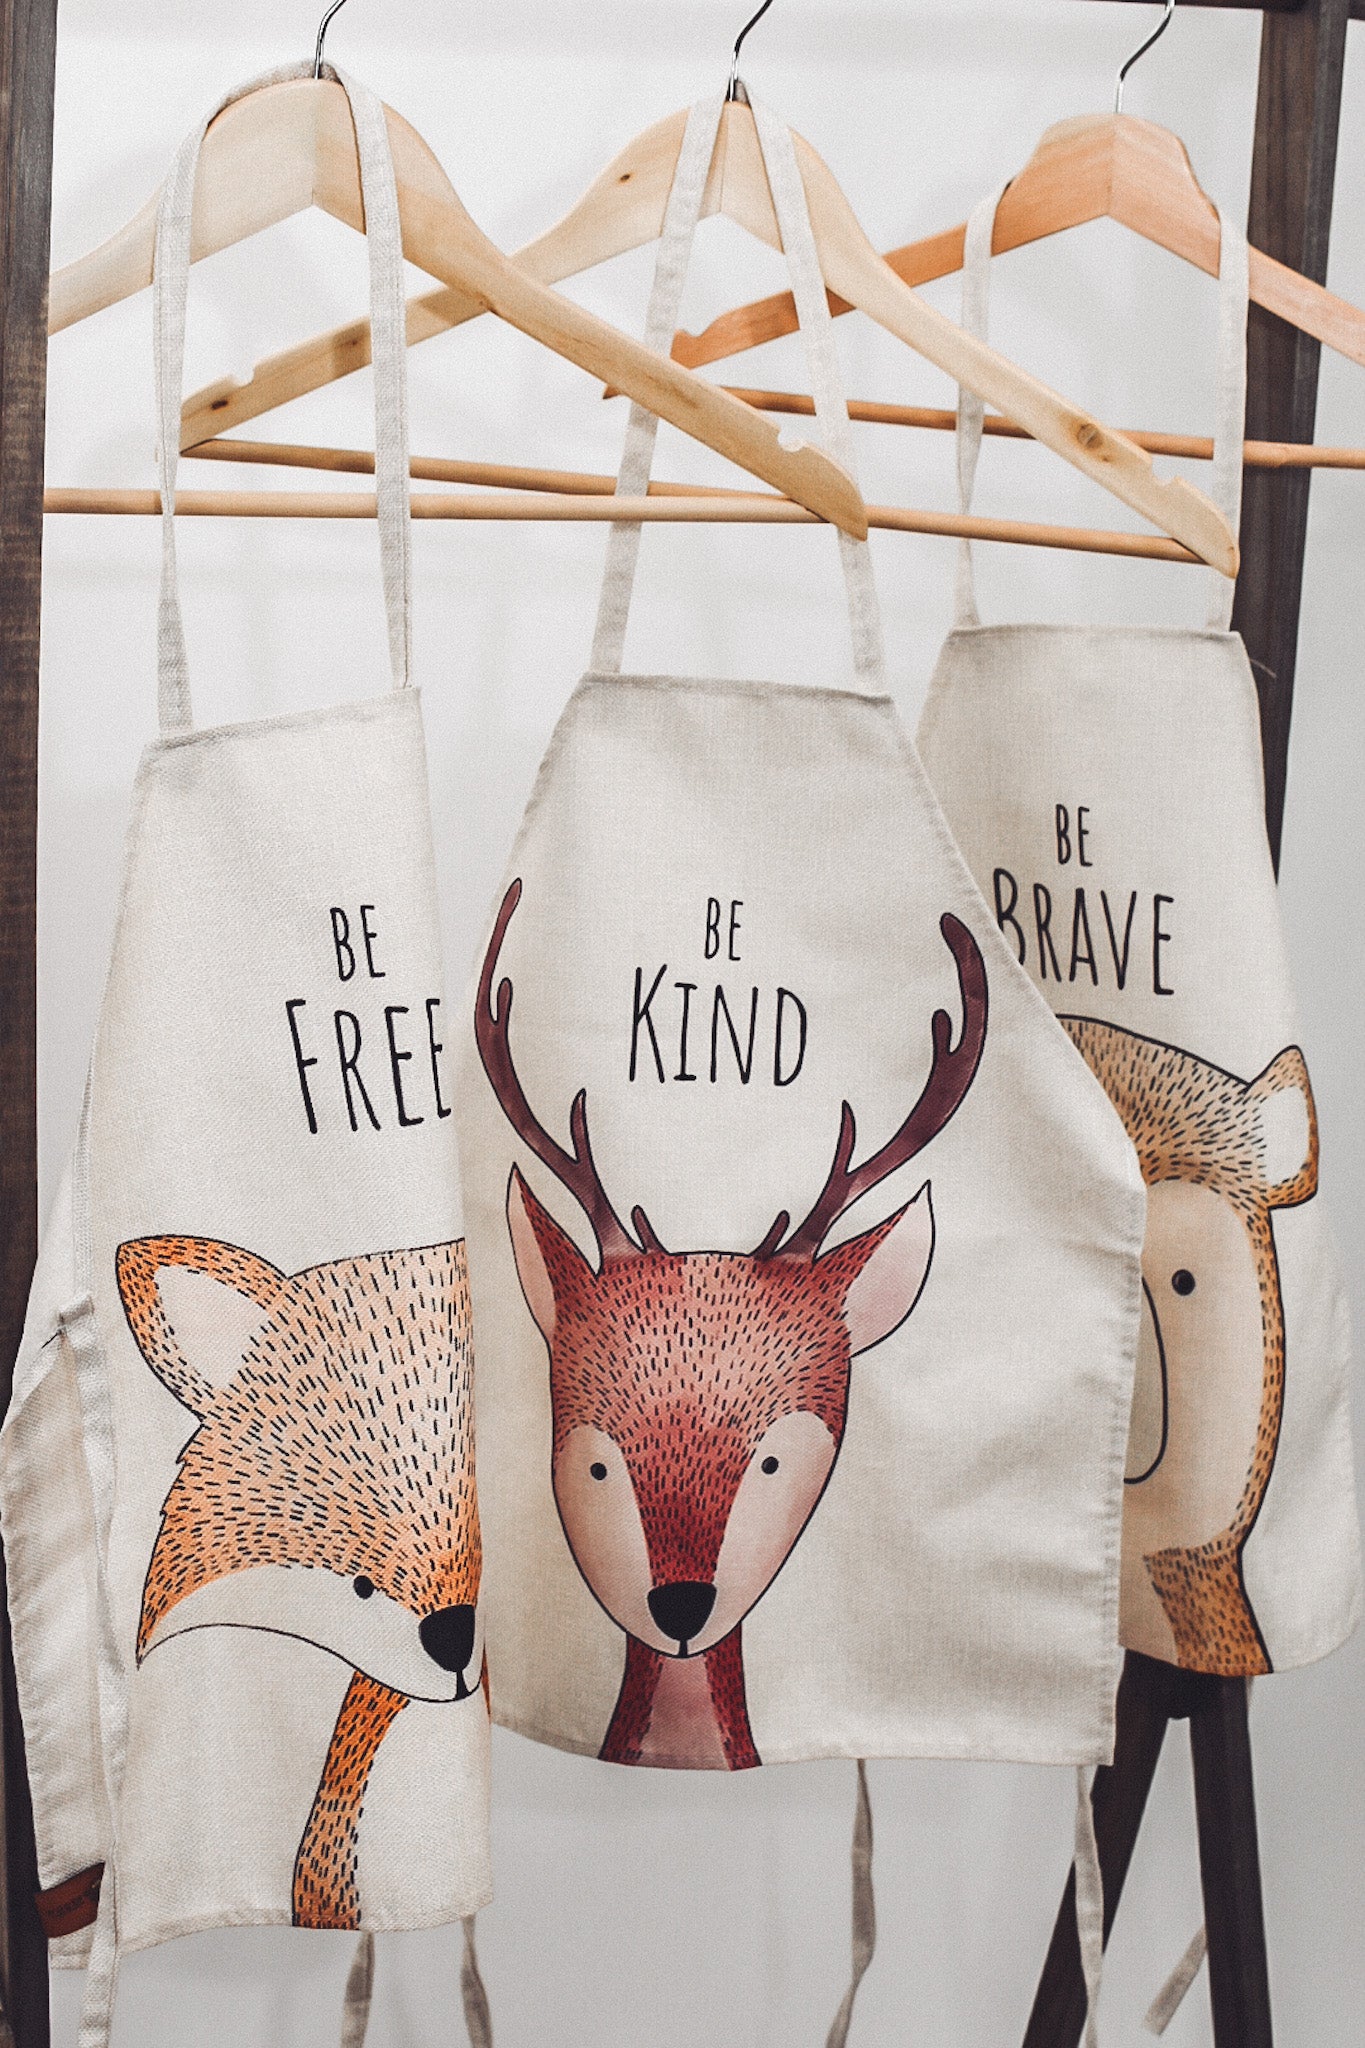 The Wild Life - Children's Apron Collection